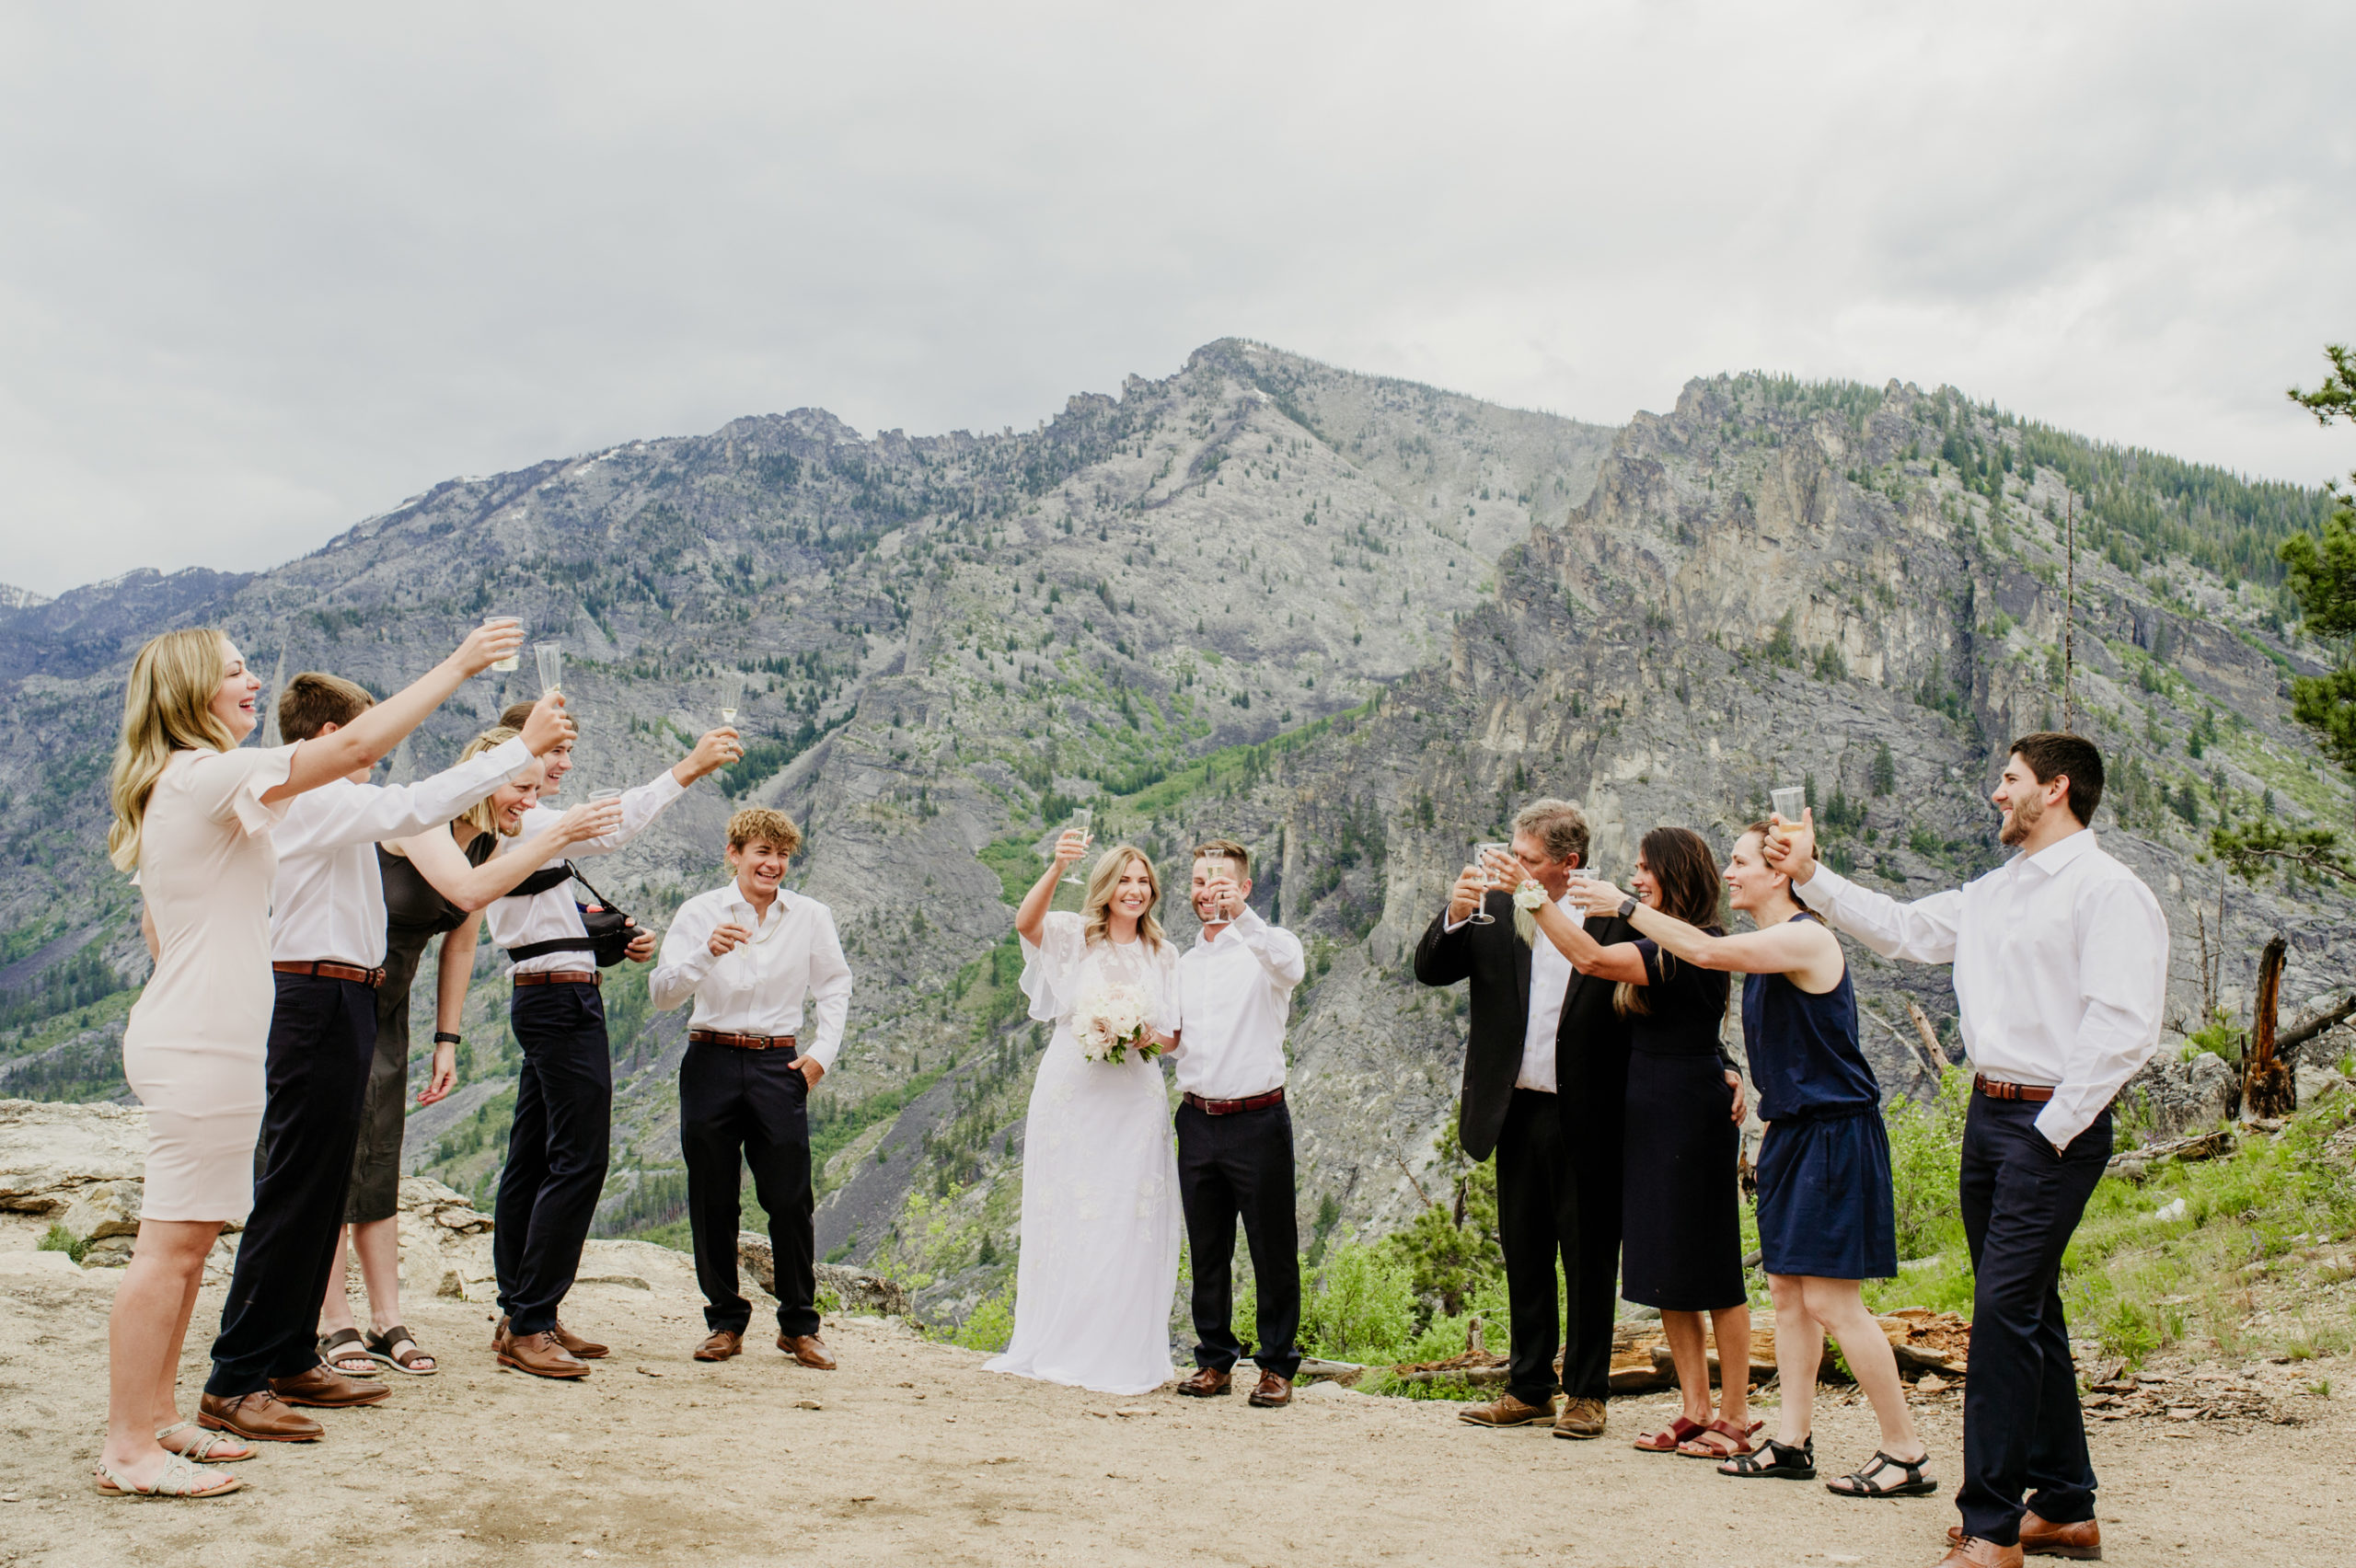 The best ideas on how to elope with friends and family, whether they are there in spirit or part of your elopement, make your wedding special.